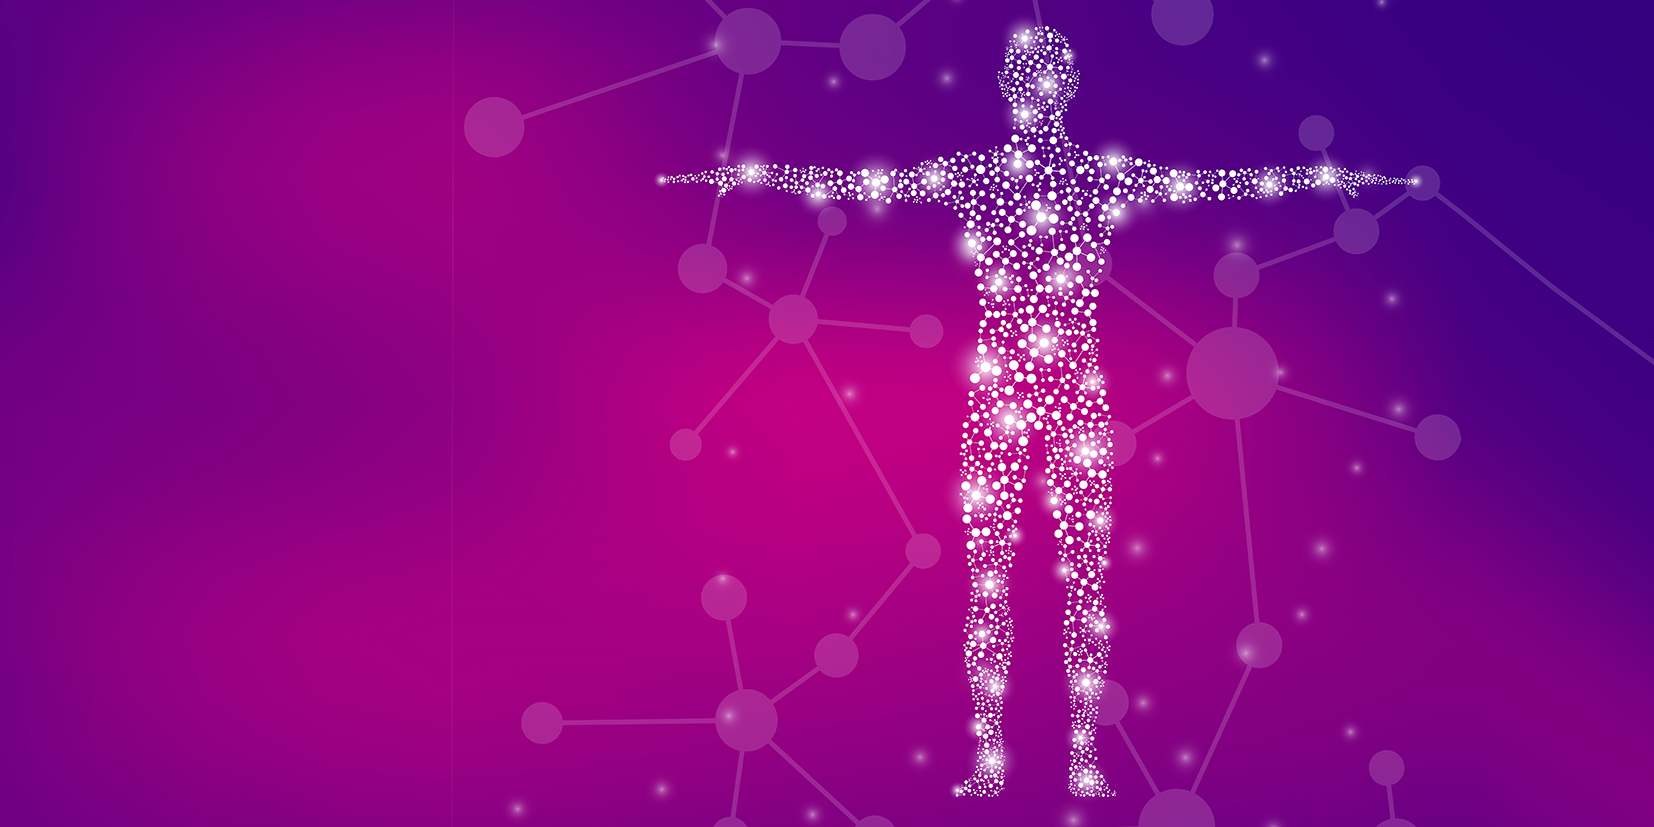 Personalised medicine harnesses the vast volumes of health care data to develop tailored therapies. (Visualisations: Shutterstock)